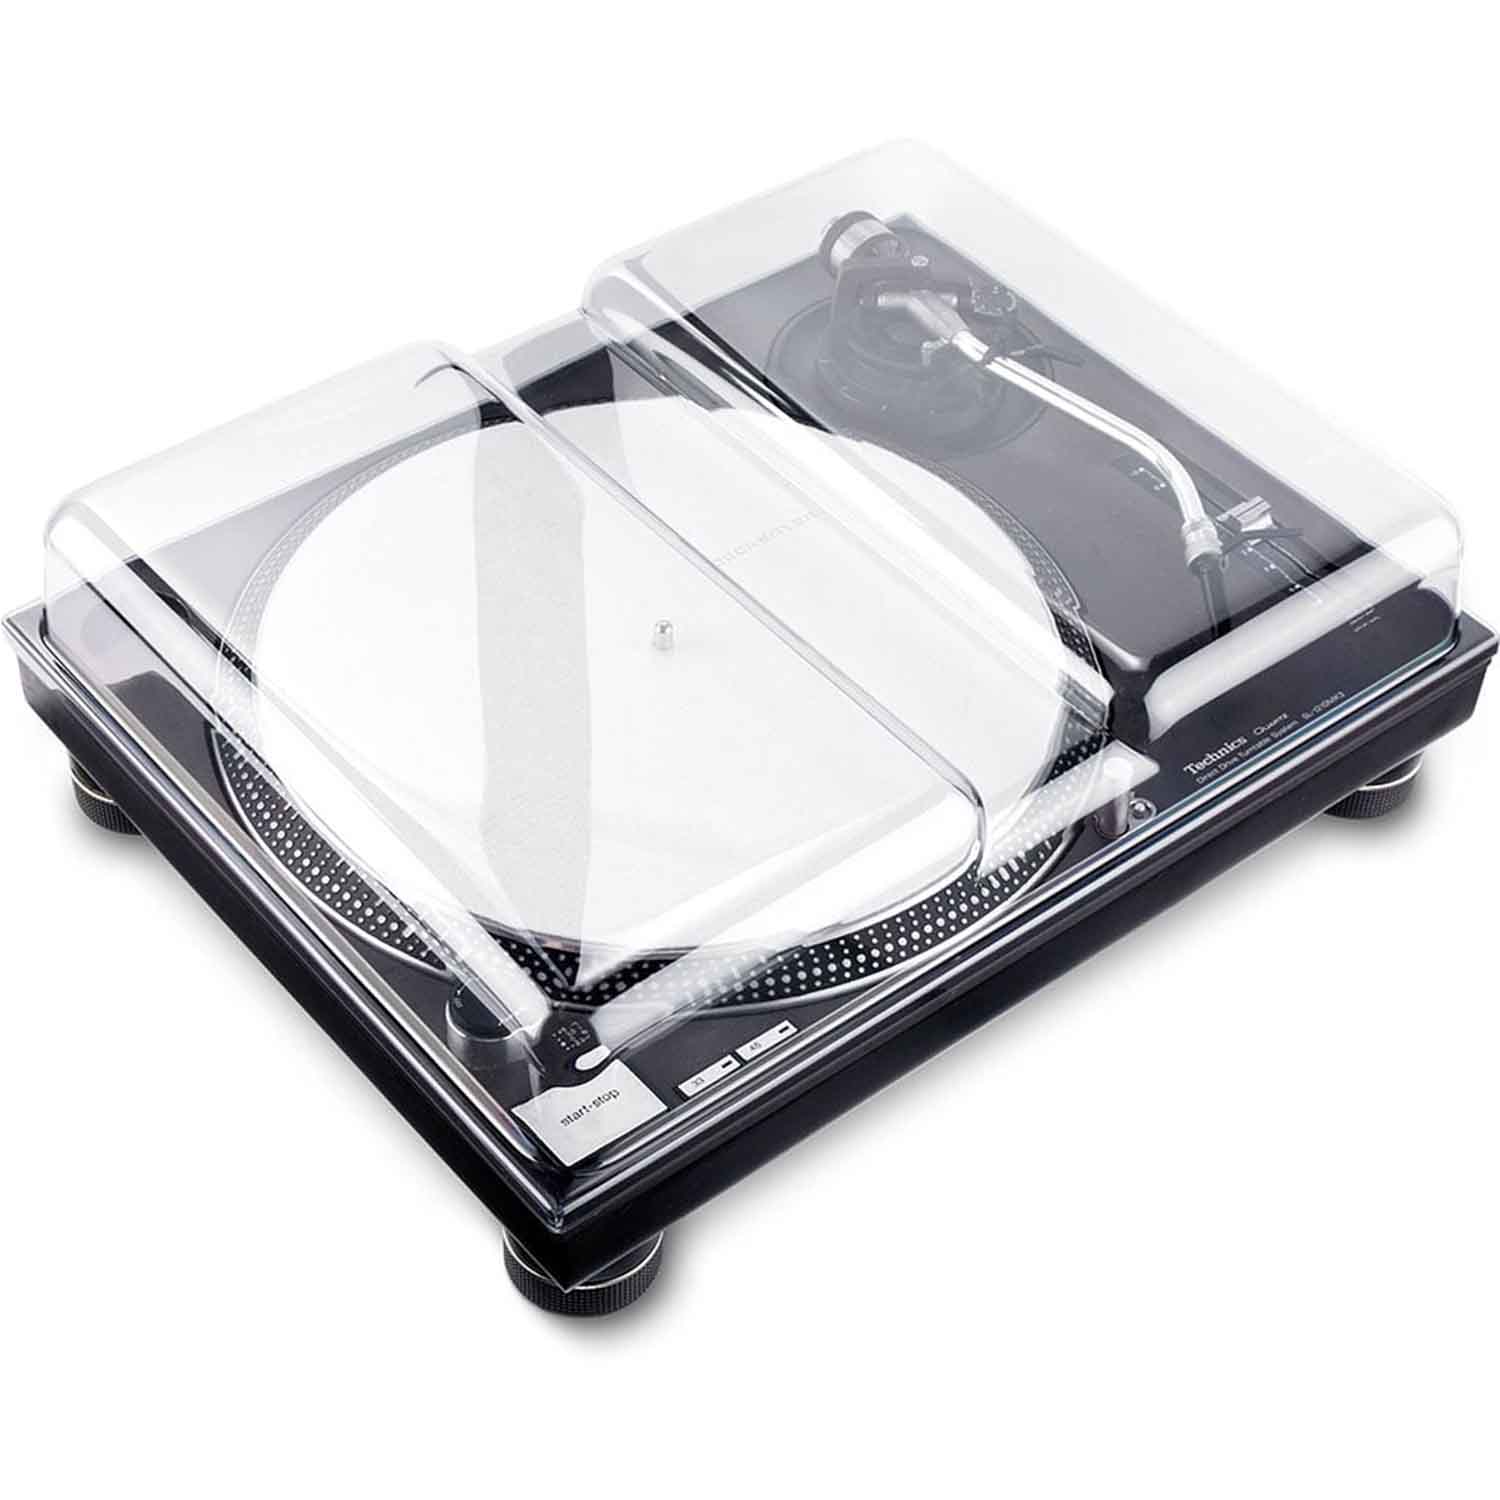 B-Stock: Decksaver DS-PC-SL1200 Protection Cover for Technics SL-1200 and Pioneer PLX-1000 DJ Turntable - Hollywood DJ